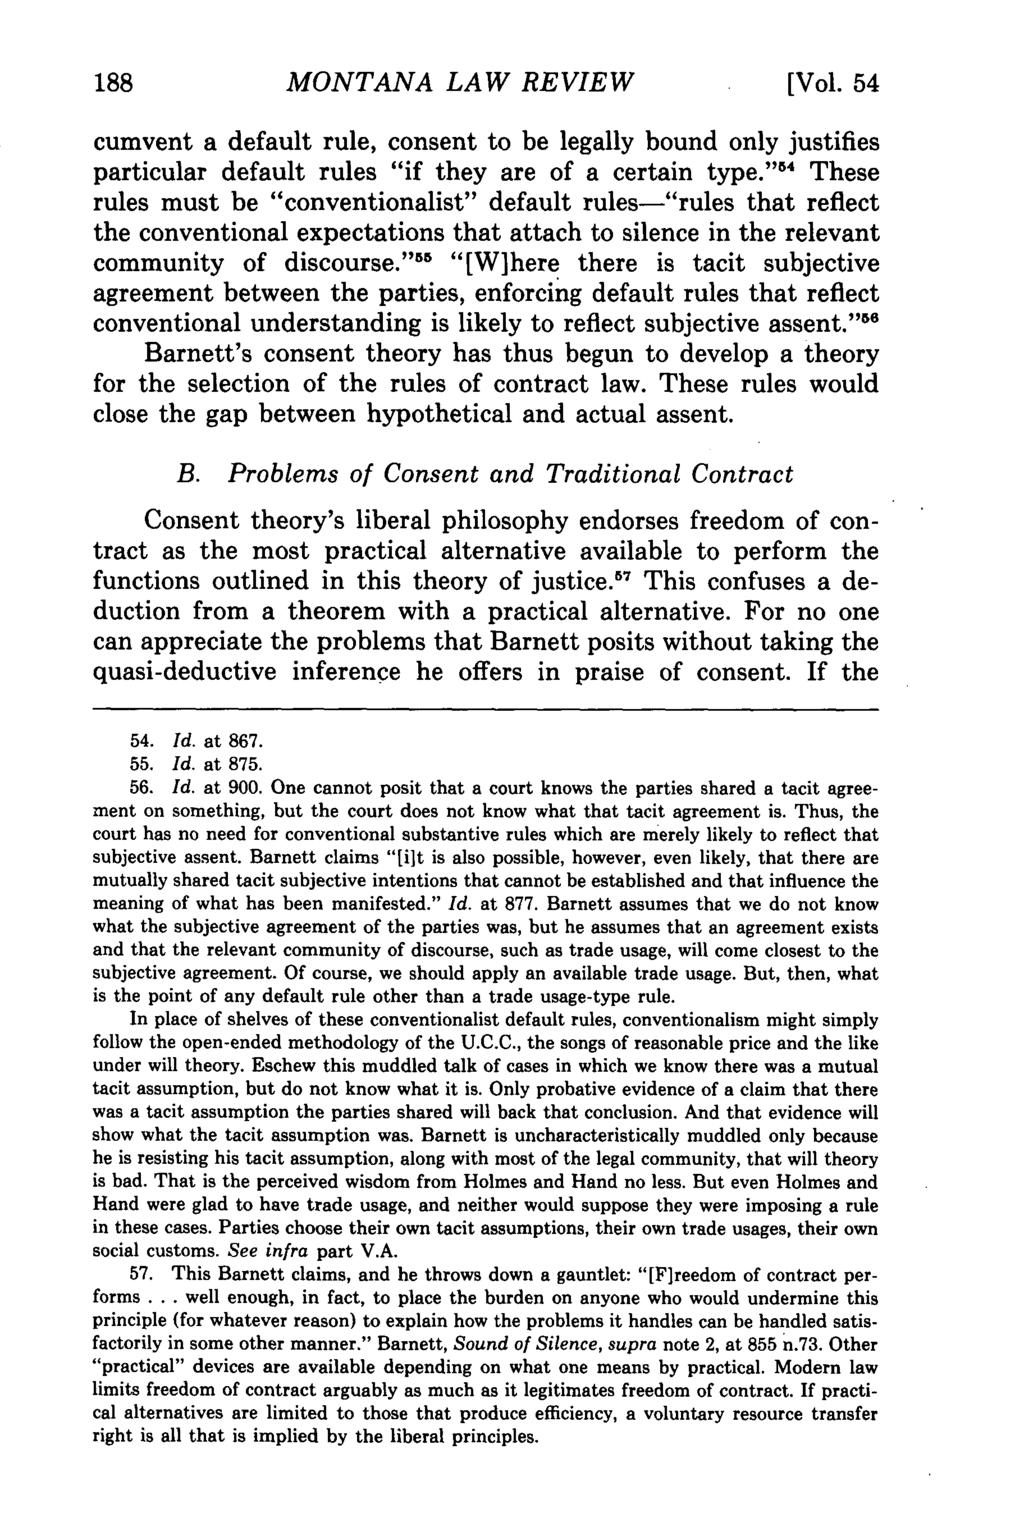 Montana Law Review, Vol. 54 [1993], Iss. 2, Art. 1 MONTANA LAW REVIEW [Vol.